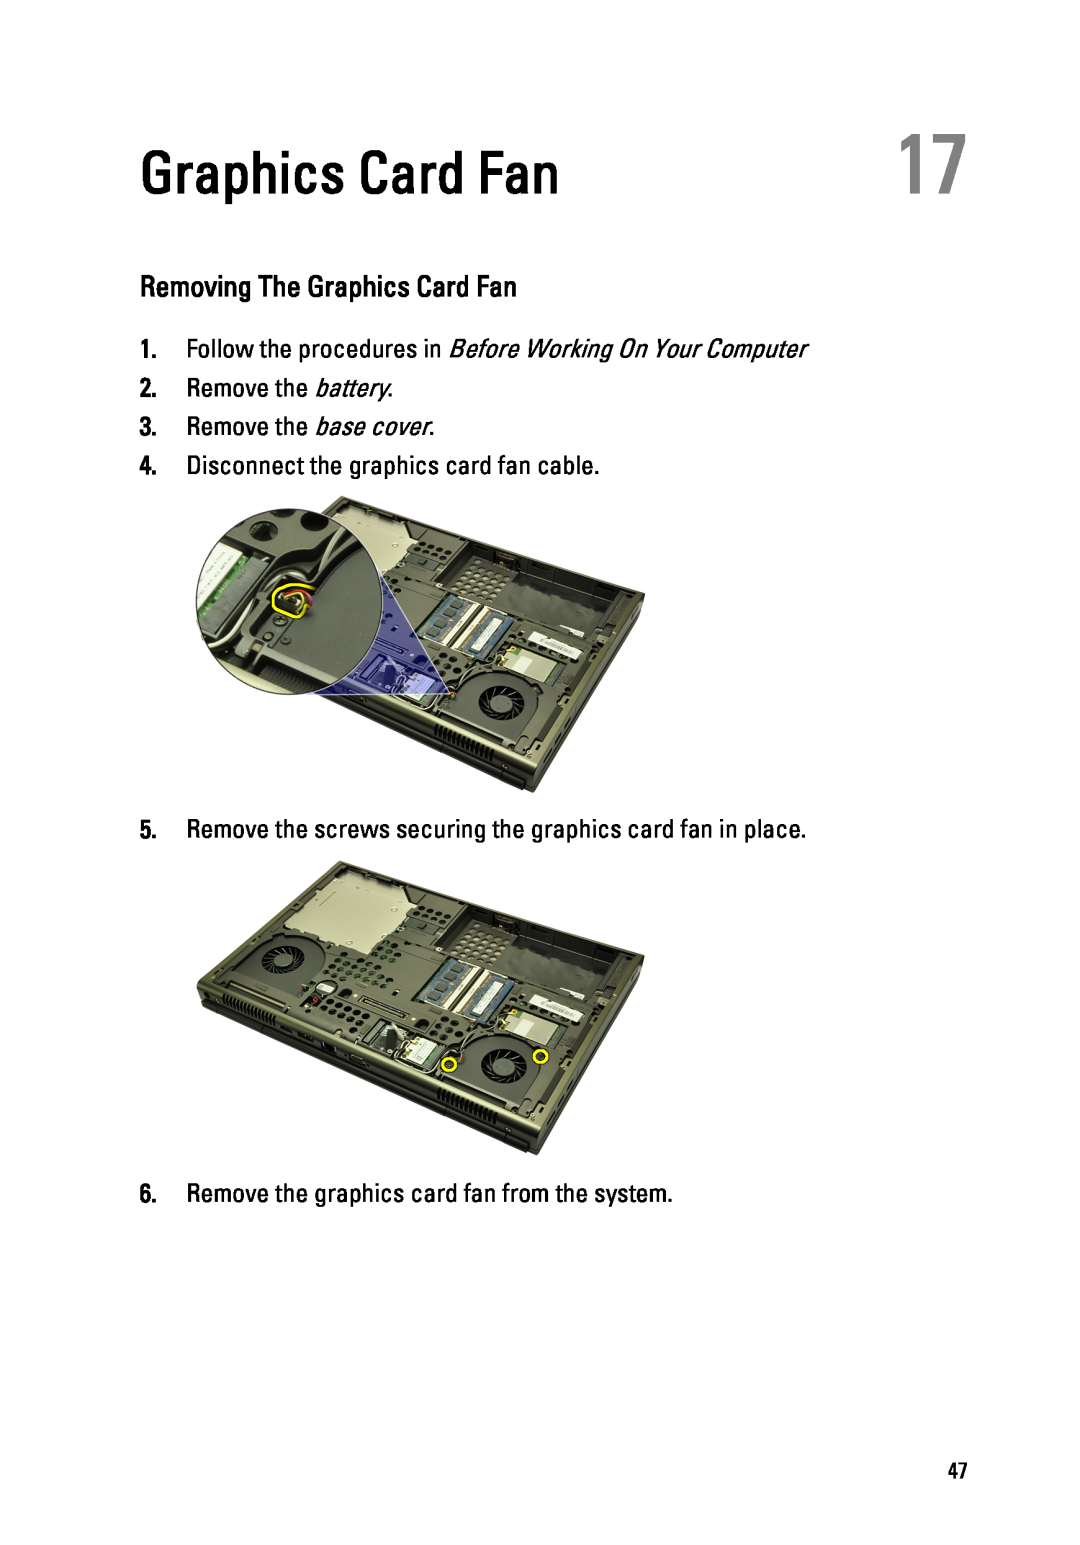 Dell M4600 owner manual Removing The Graphics Card Fan, Disconnect the graphics card fan cable 